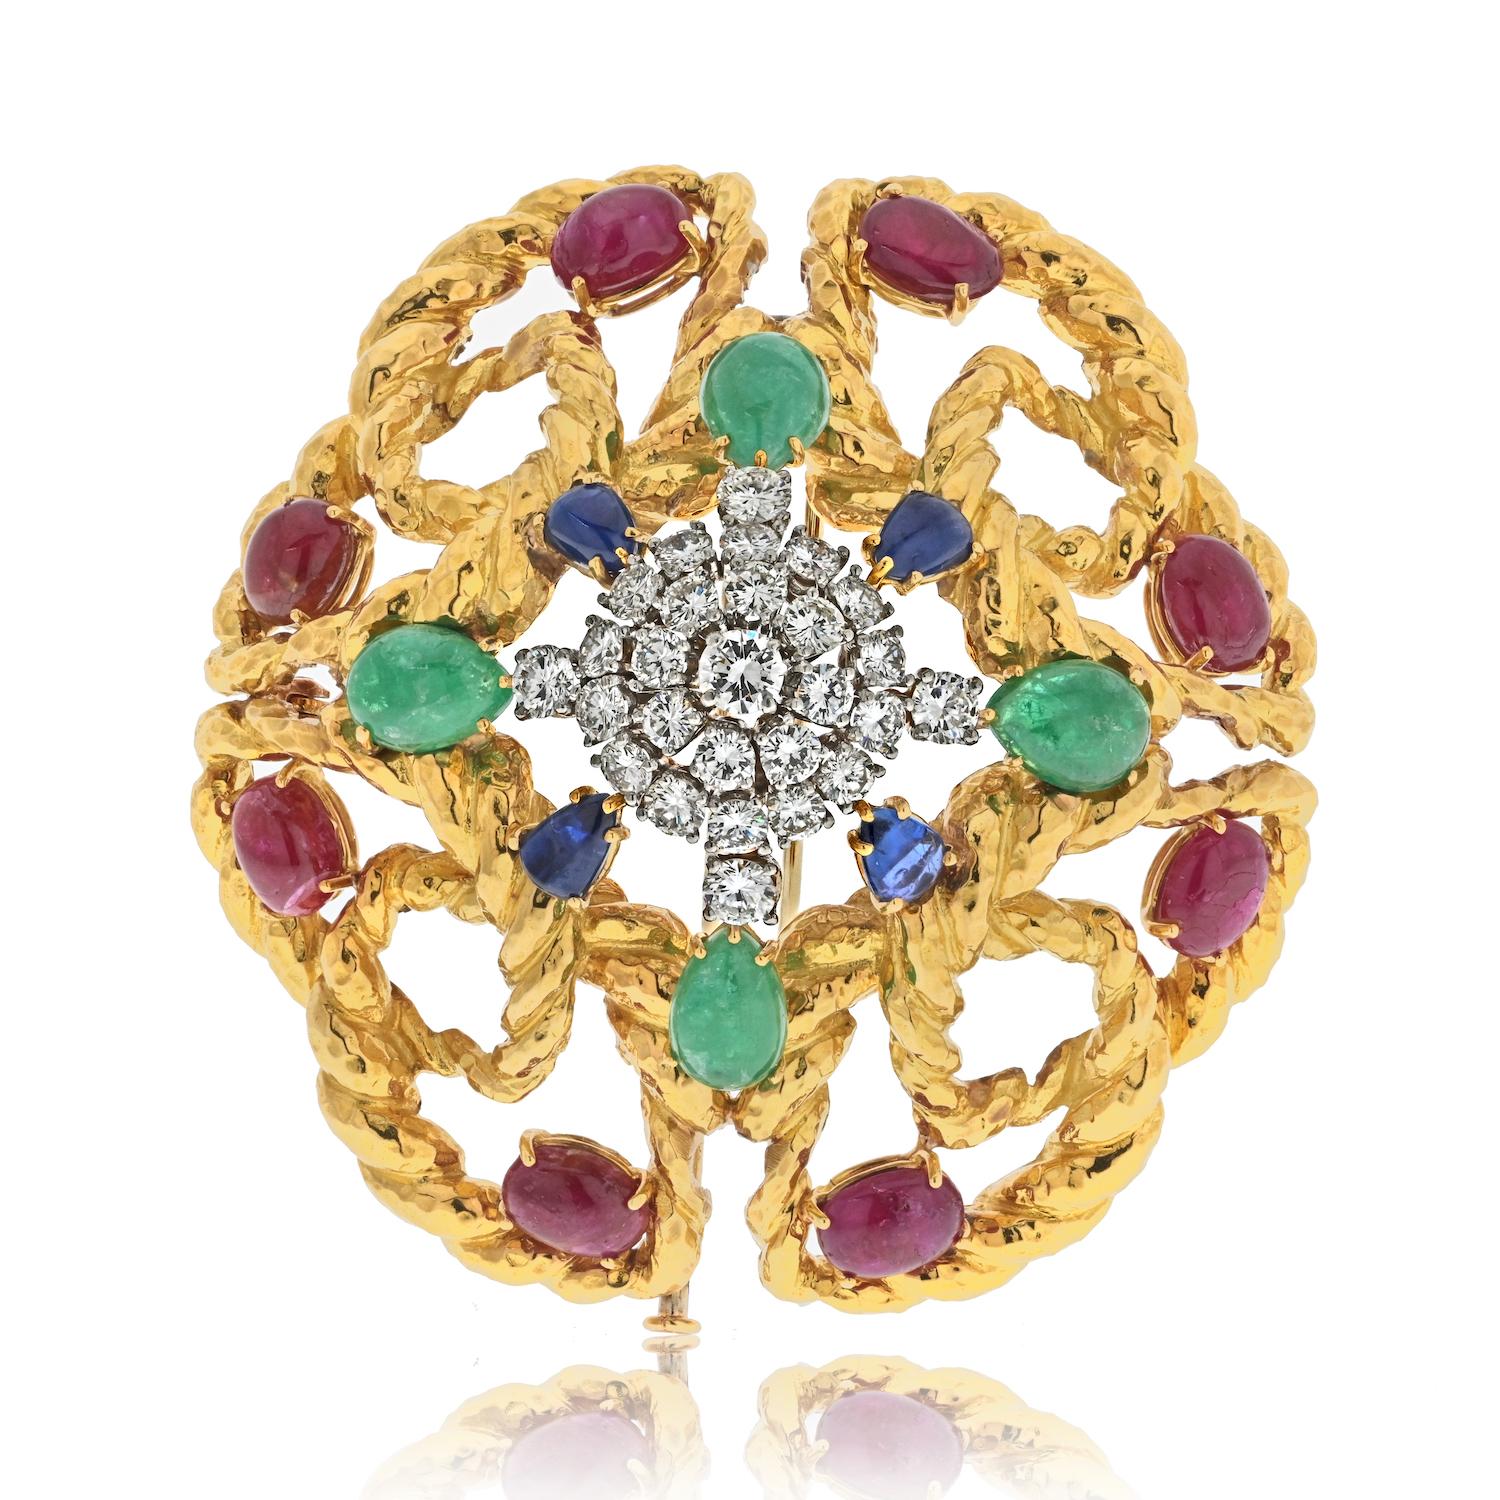 Elevate your jewelry collection with this exquisite David Webb Platinum & 18K Yellow Gold Multigem Openwork Brooch, a true testament to the designer's artistry. Measuring 6cm in width, this piece is a striking blend of color, elegance, and